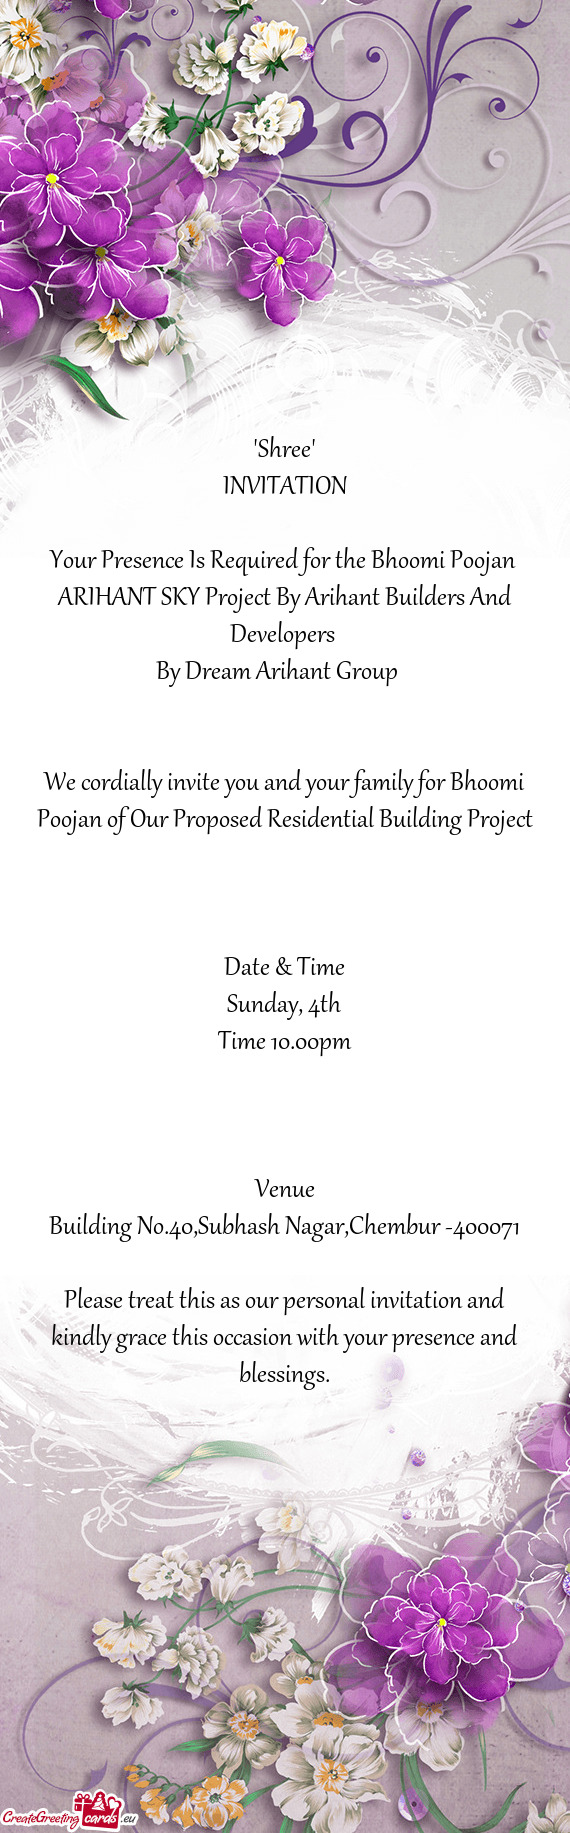 ARIHANT SKY Project By Arihant Builders And Developers